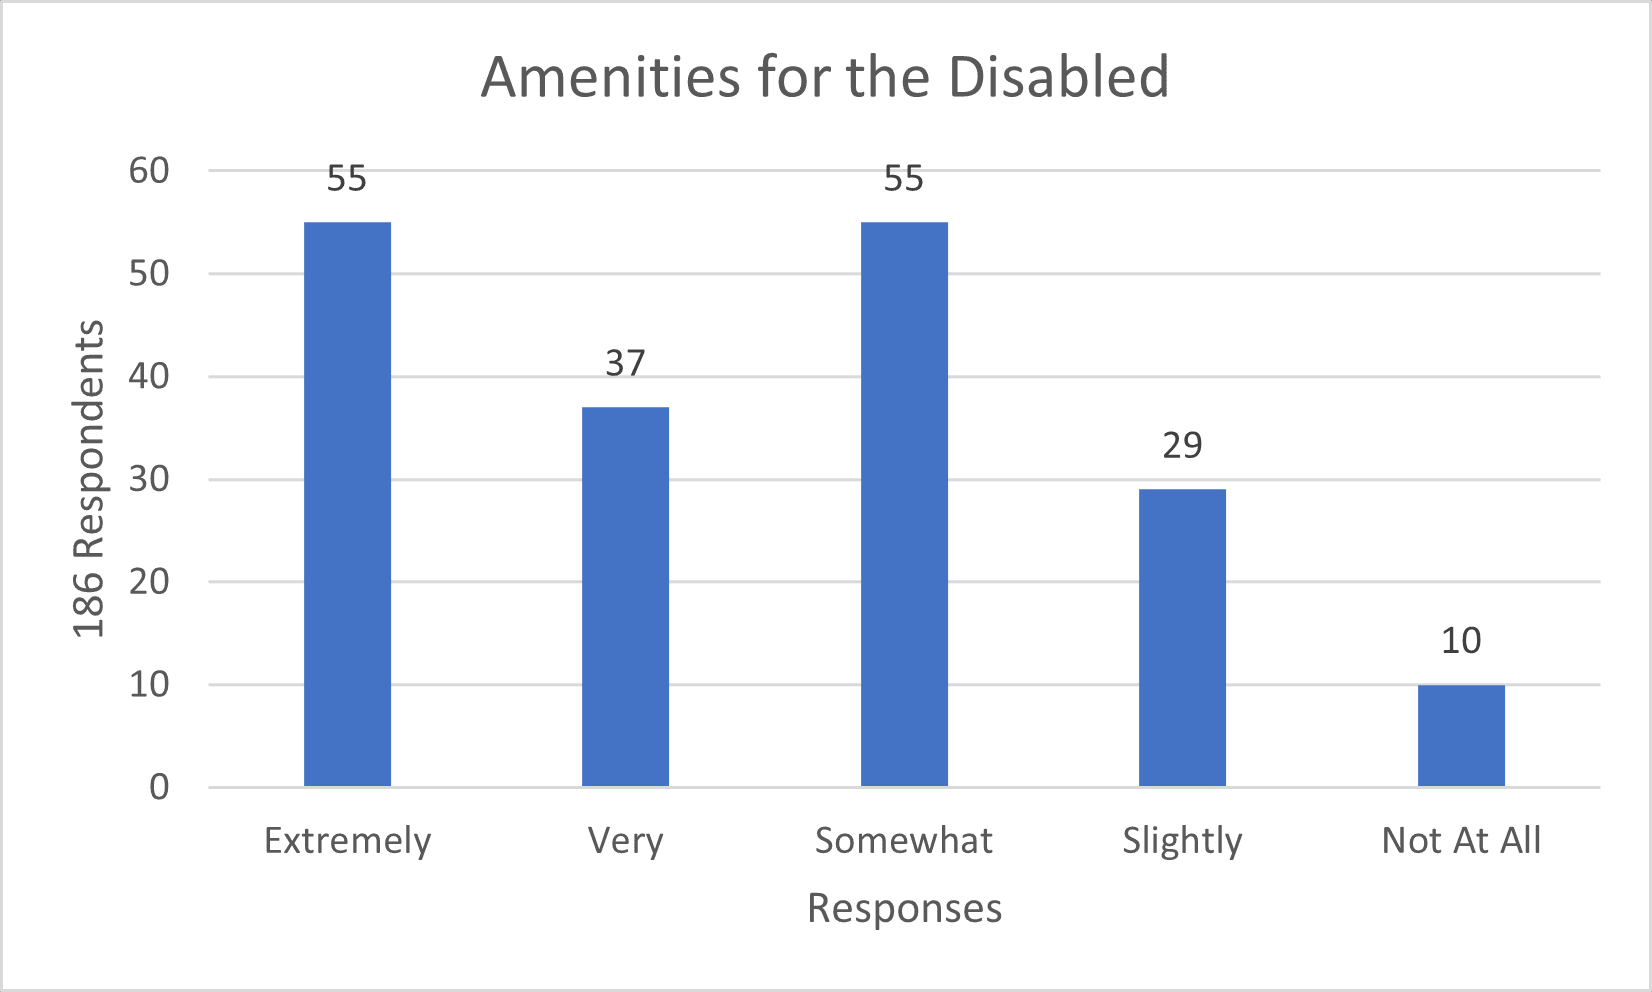 Amenities for the Disabled